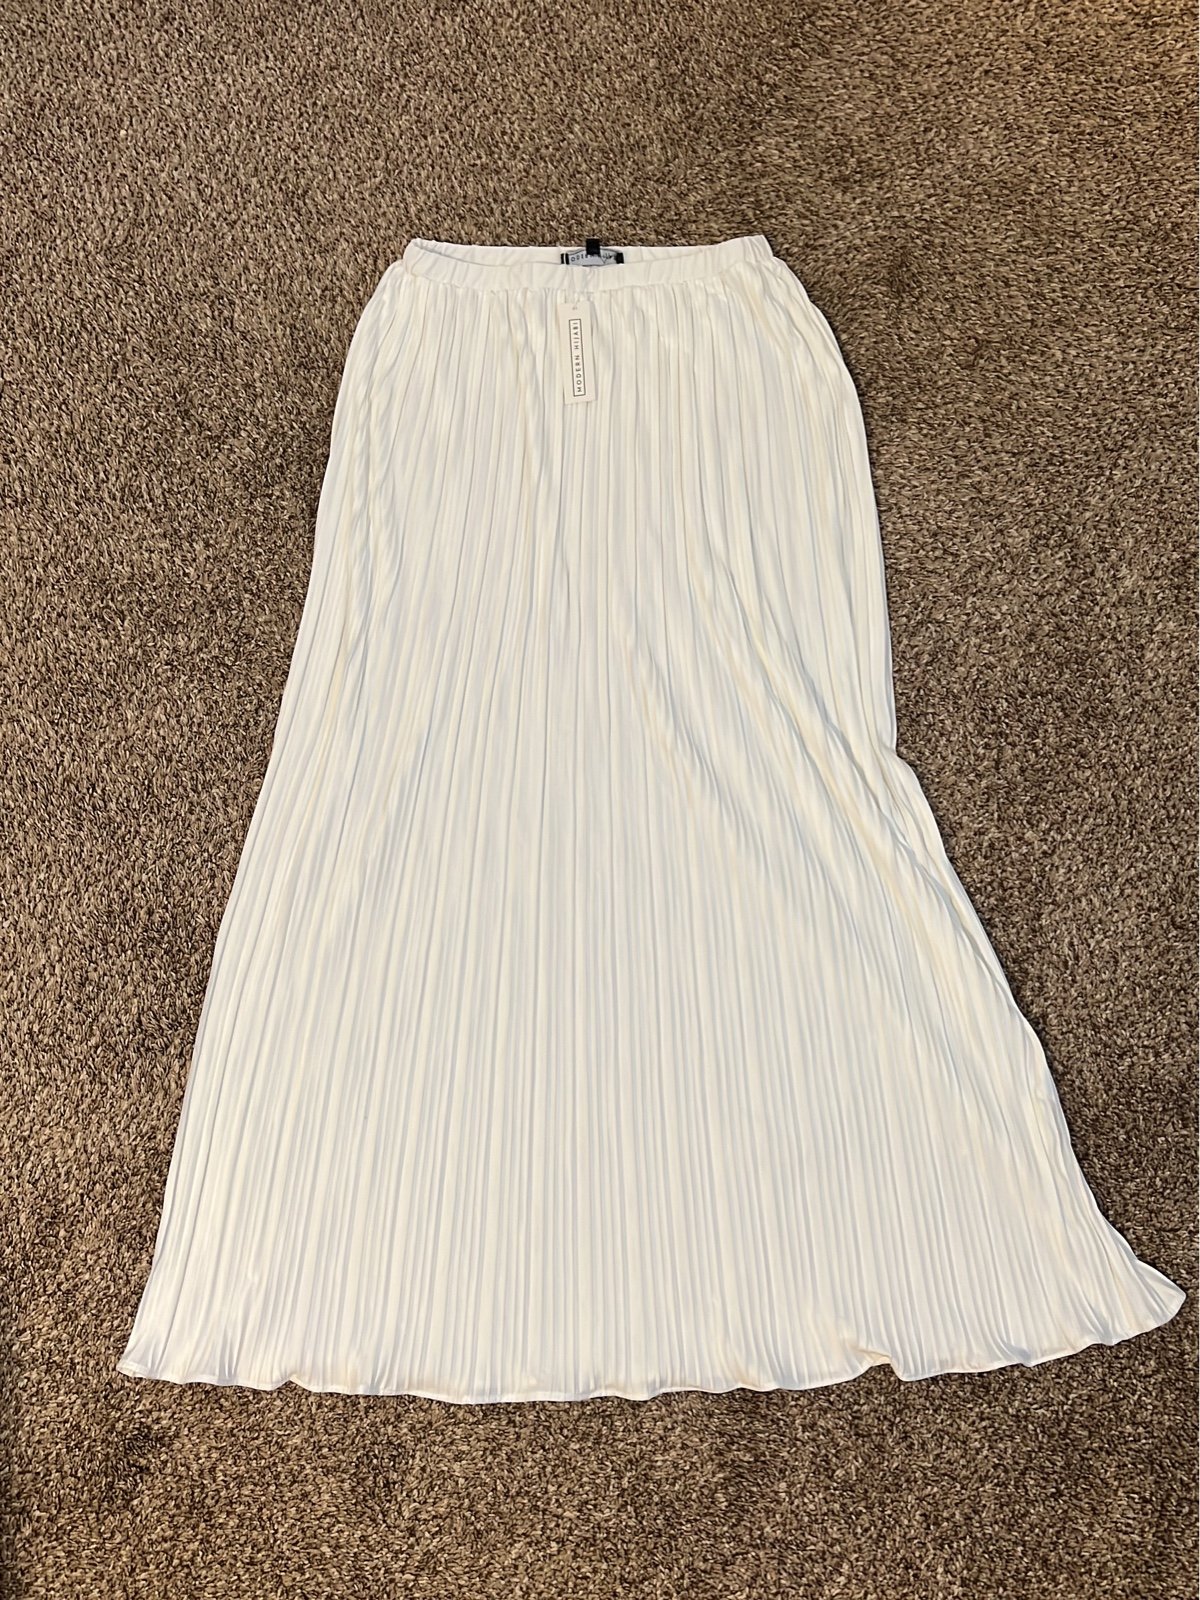 the Lowest price White Pleated Maxi Skirt Size Large K04lXSCu6 Store Online